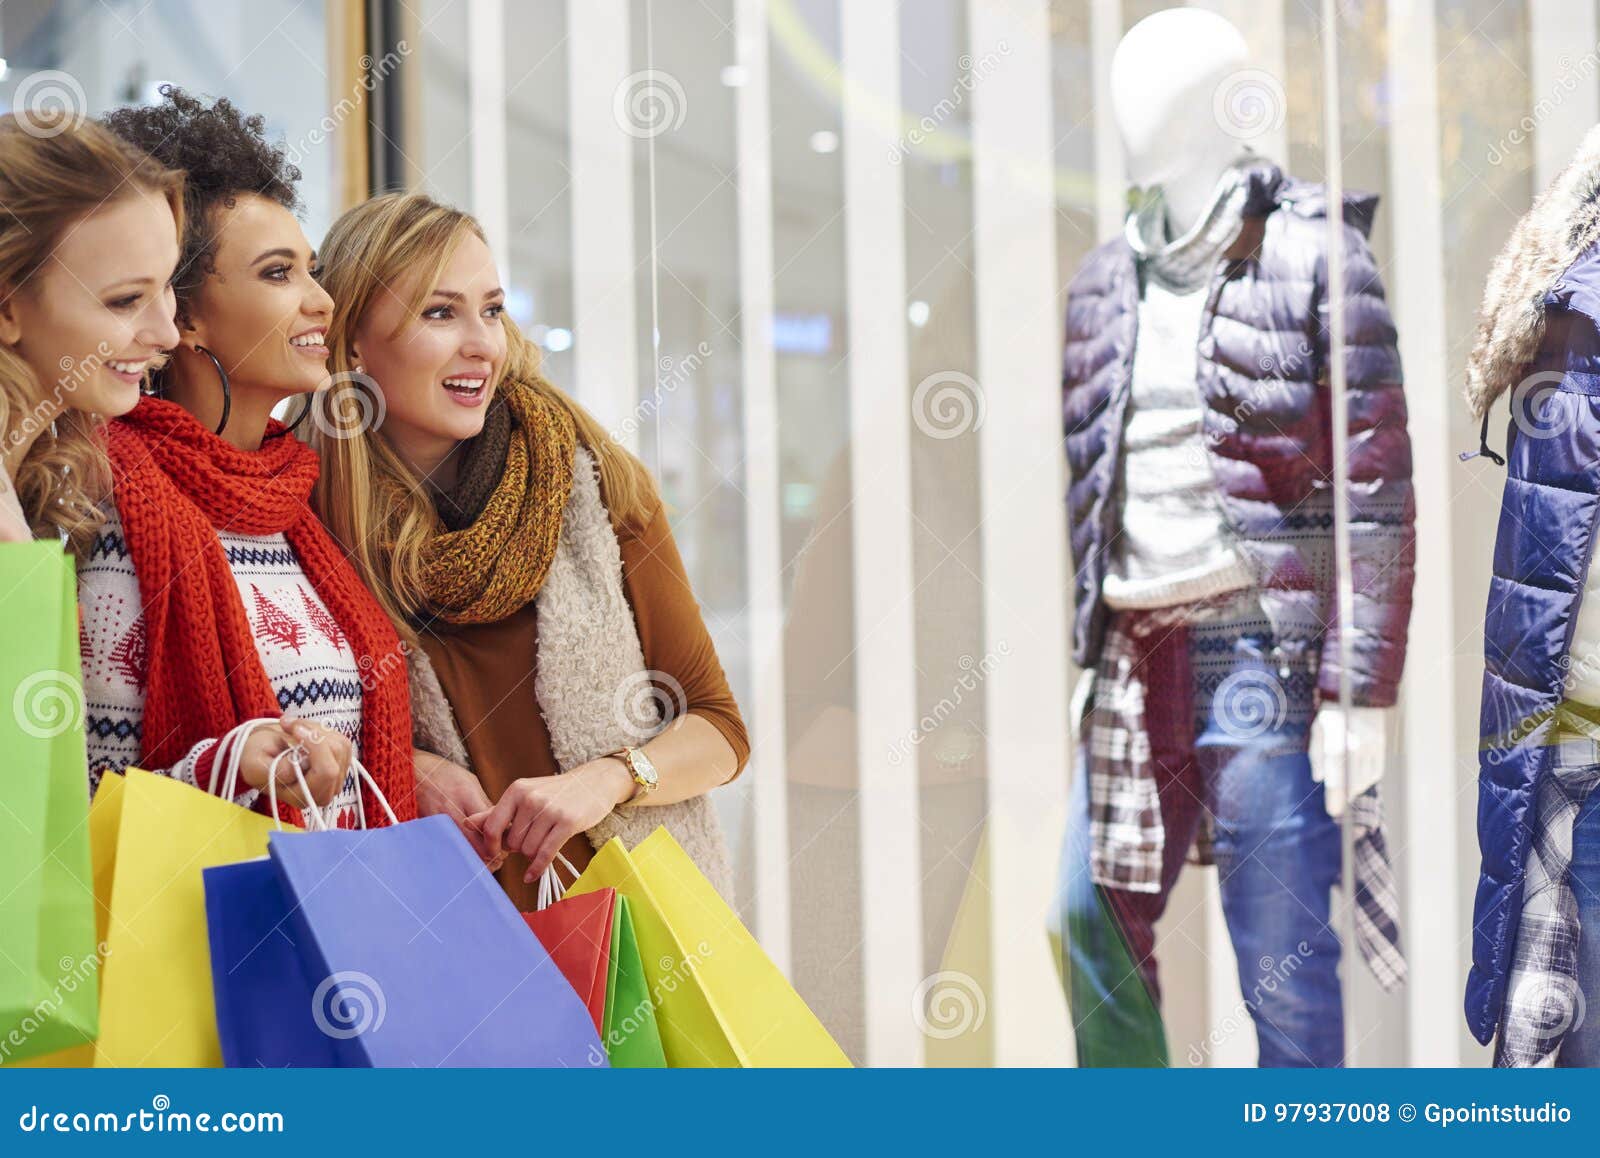 Christmas Shopping with Friends Stock Photo - Image of enjoyment, away ...